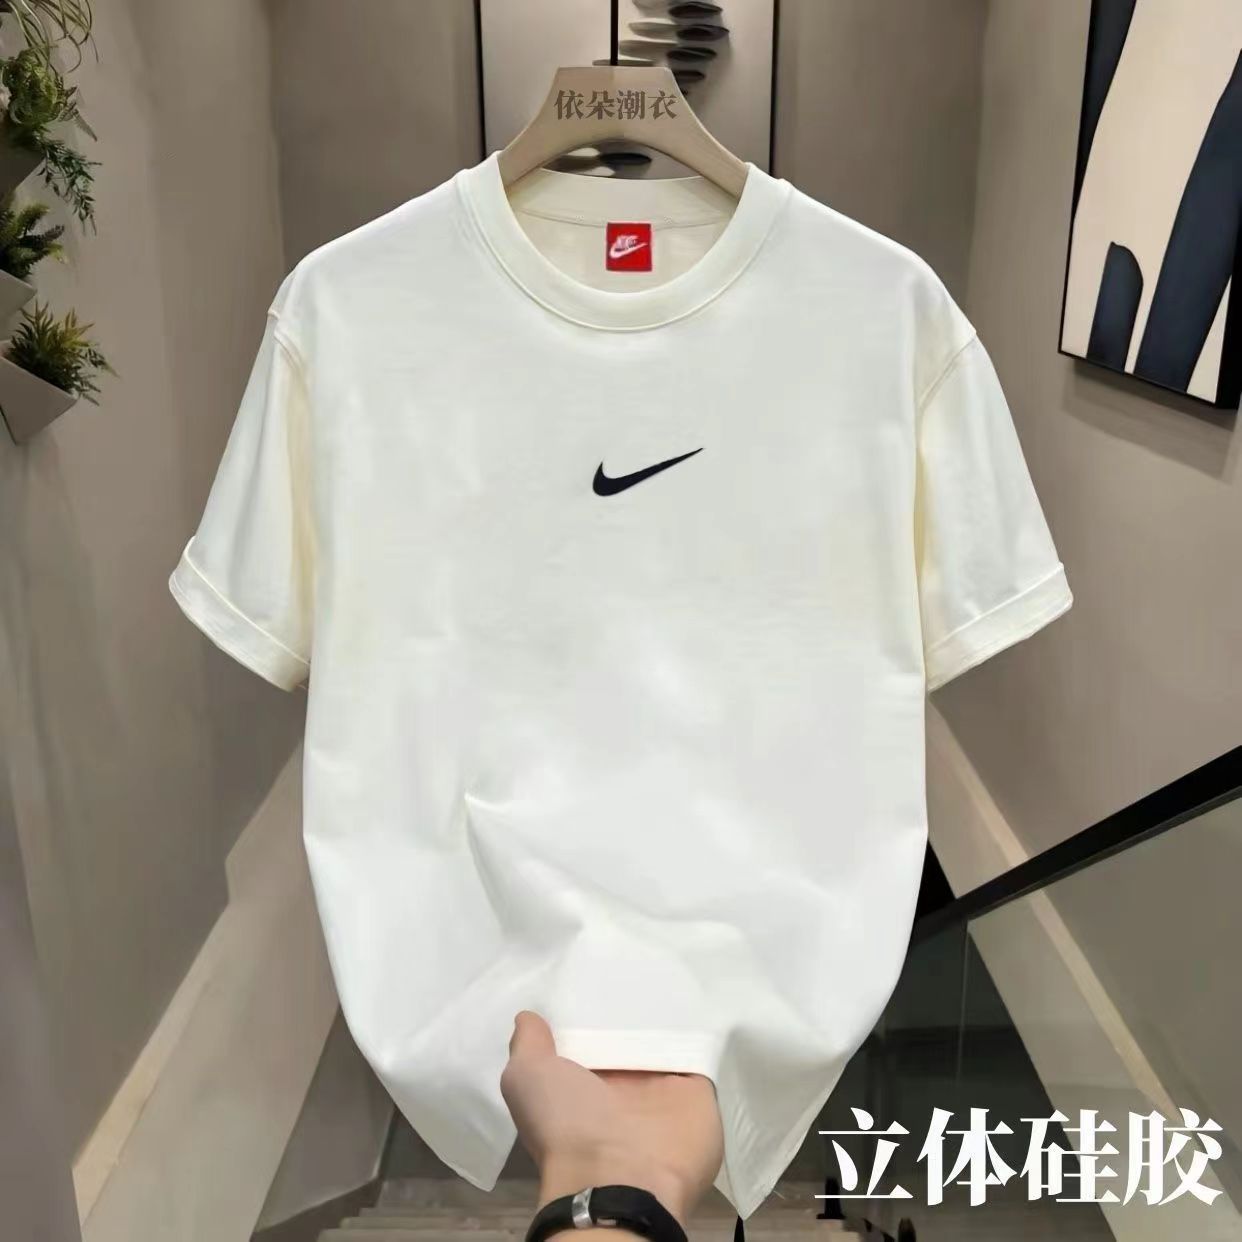 official outlets cotton new men‘s and women‘s t-shirt sports t-shirt casual loose short sleeves couple half sleeve top